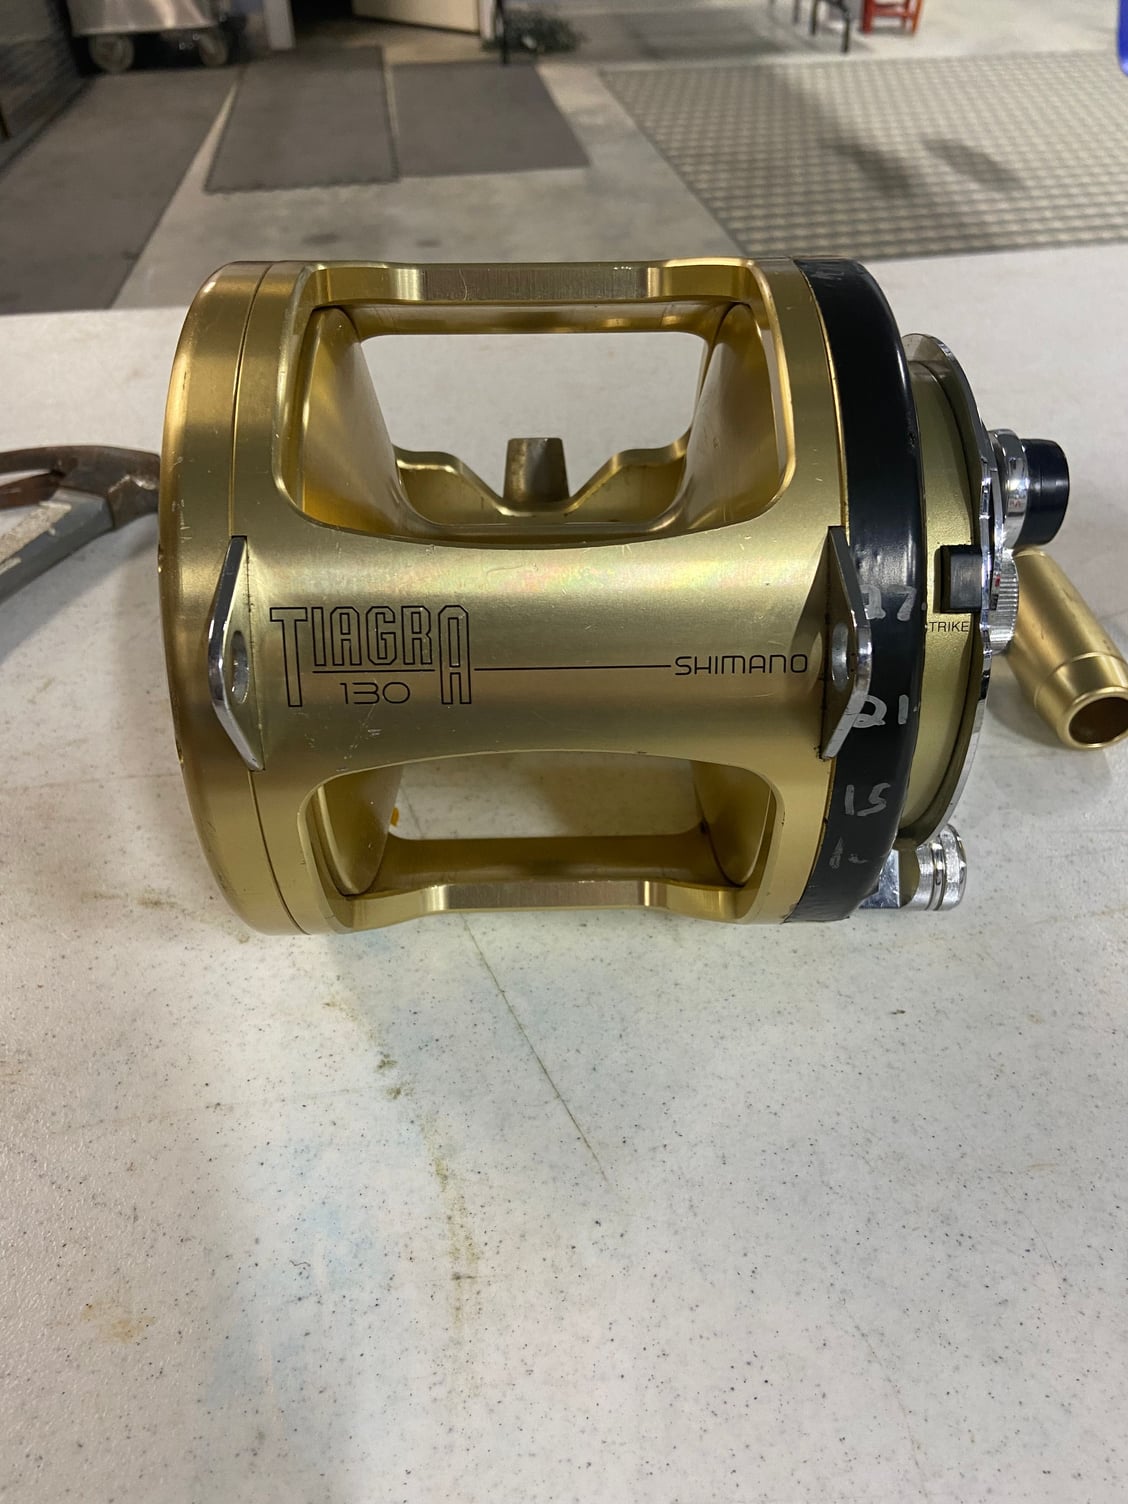 2 shimano tiagra 130 2 speed reels - The Hull Truth - Boating and